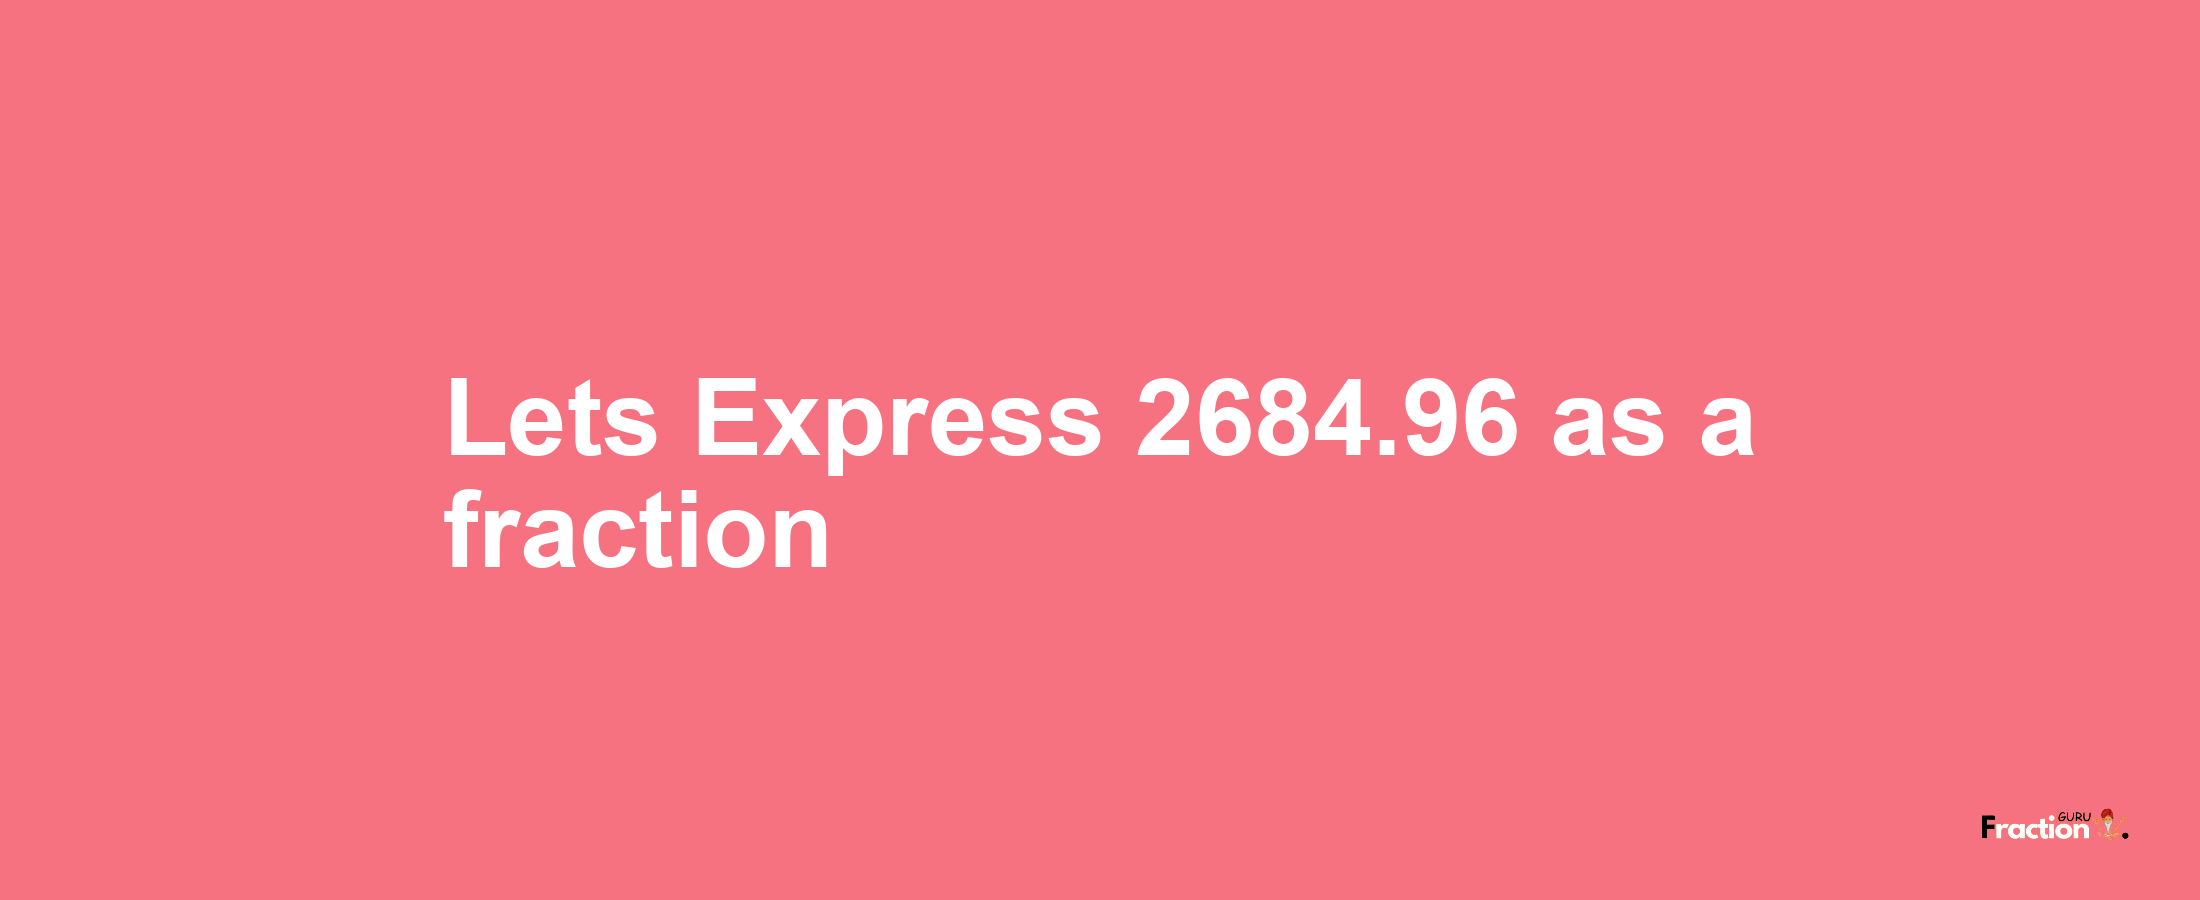 Lets Express 2684.96 as afraction